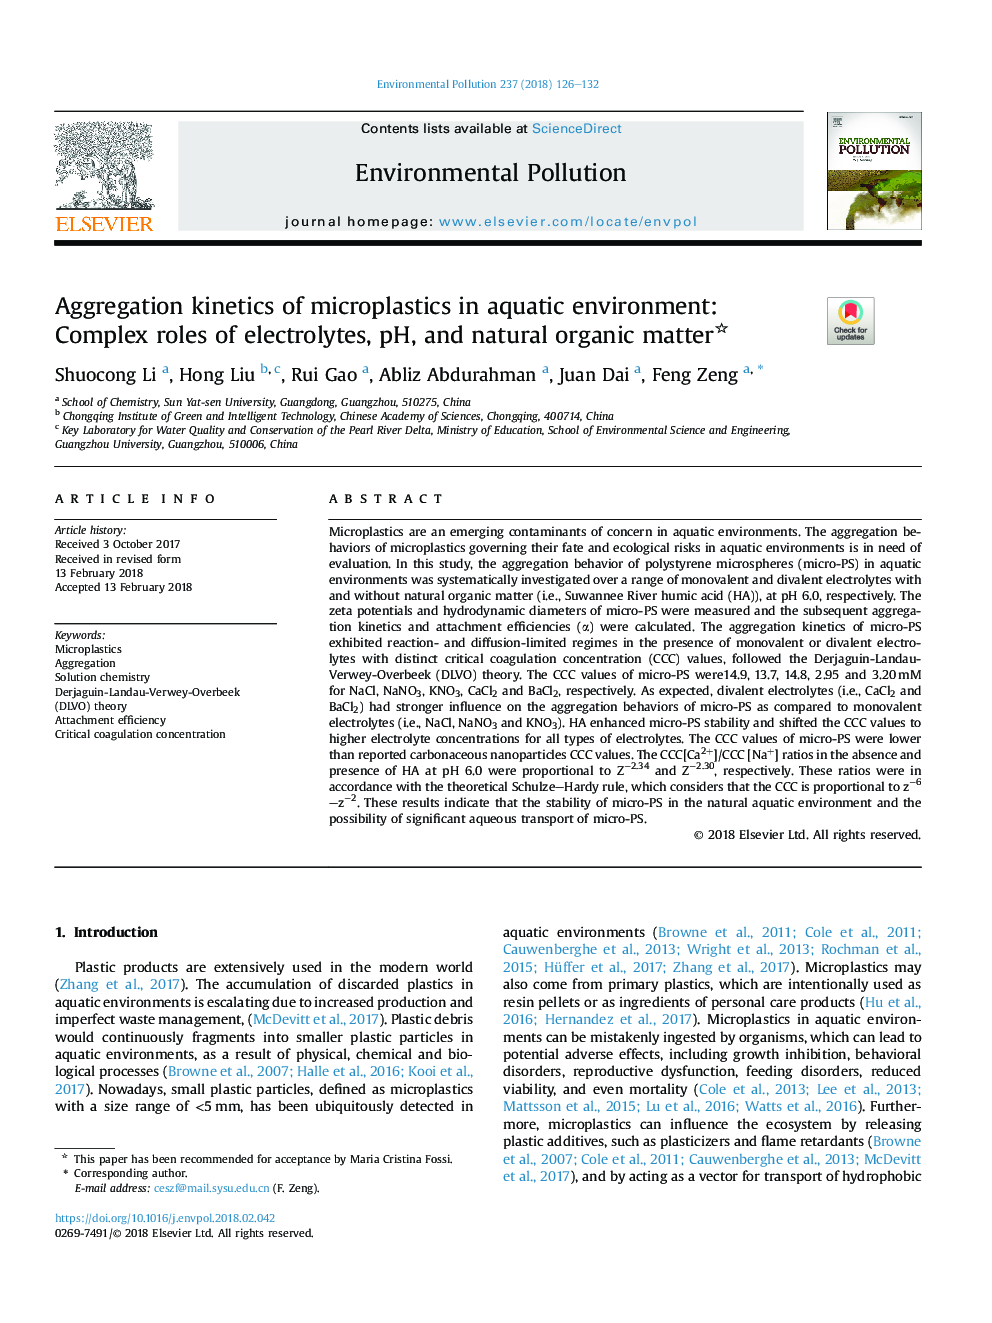 Aggregation kinetics of microplastics in aquatic environment: Complex roles of electrolytes, pH, and natural organic matter